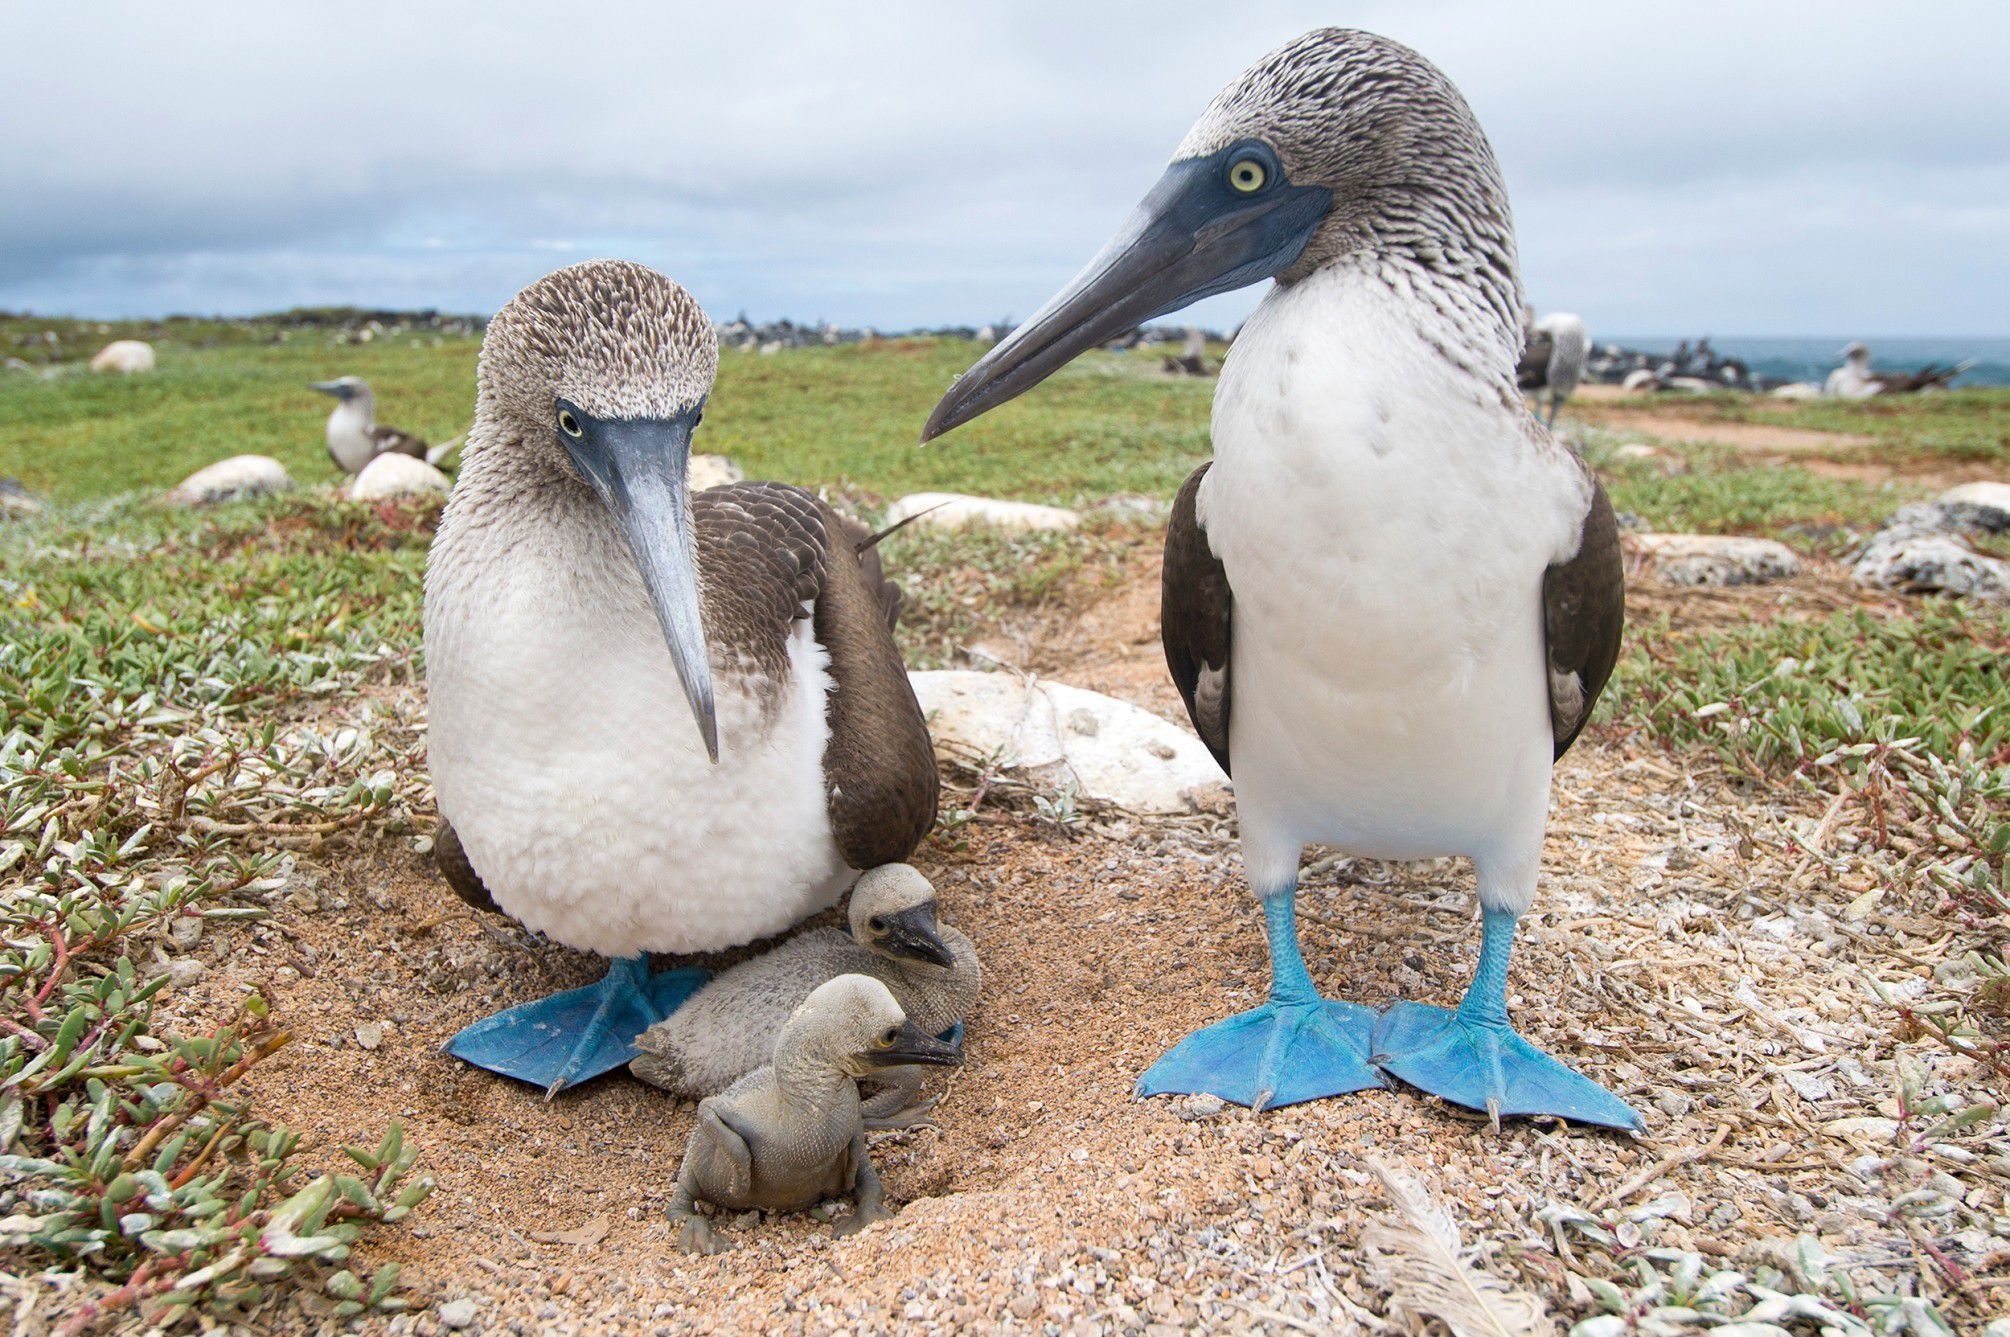 Blue footed booby, Phone desktop wallpapers, Pictures, Adorable, 2010x1340 HD Desktop